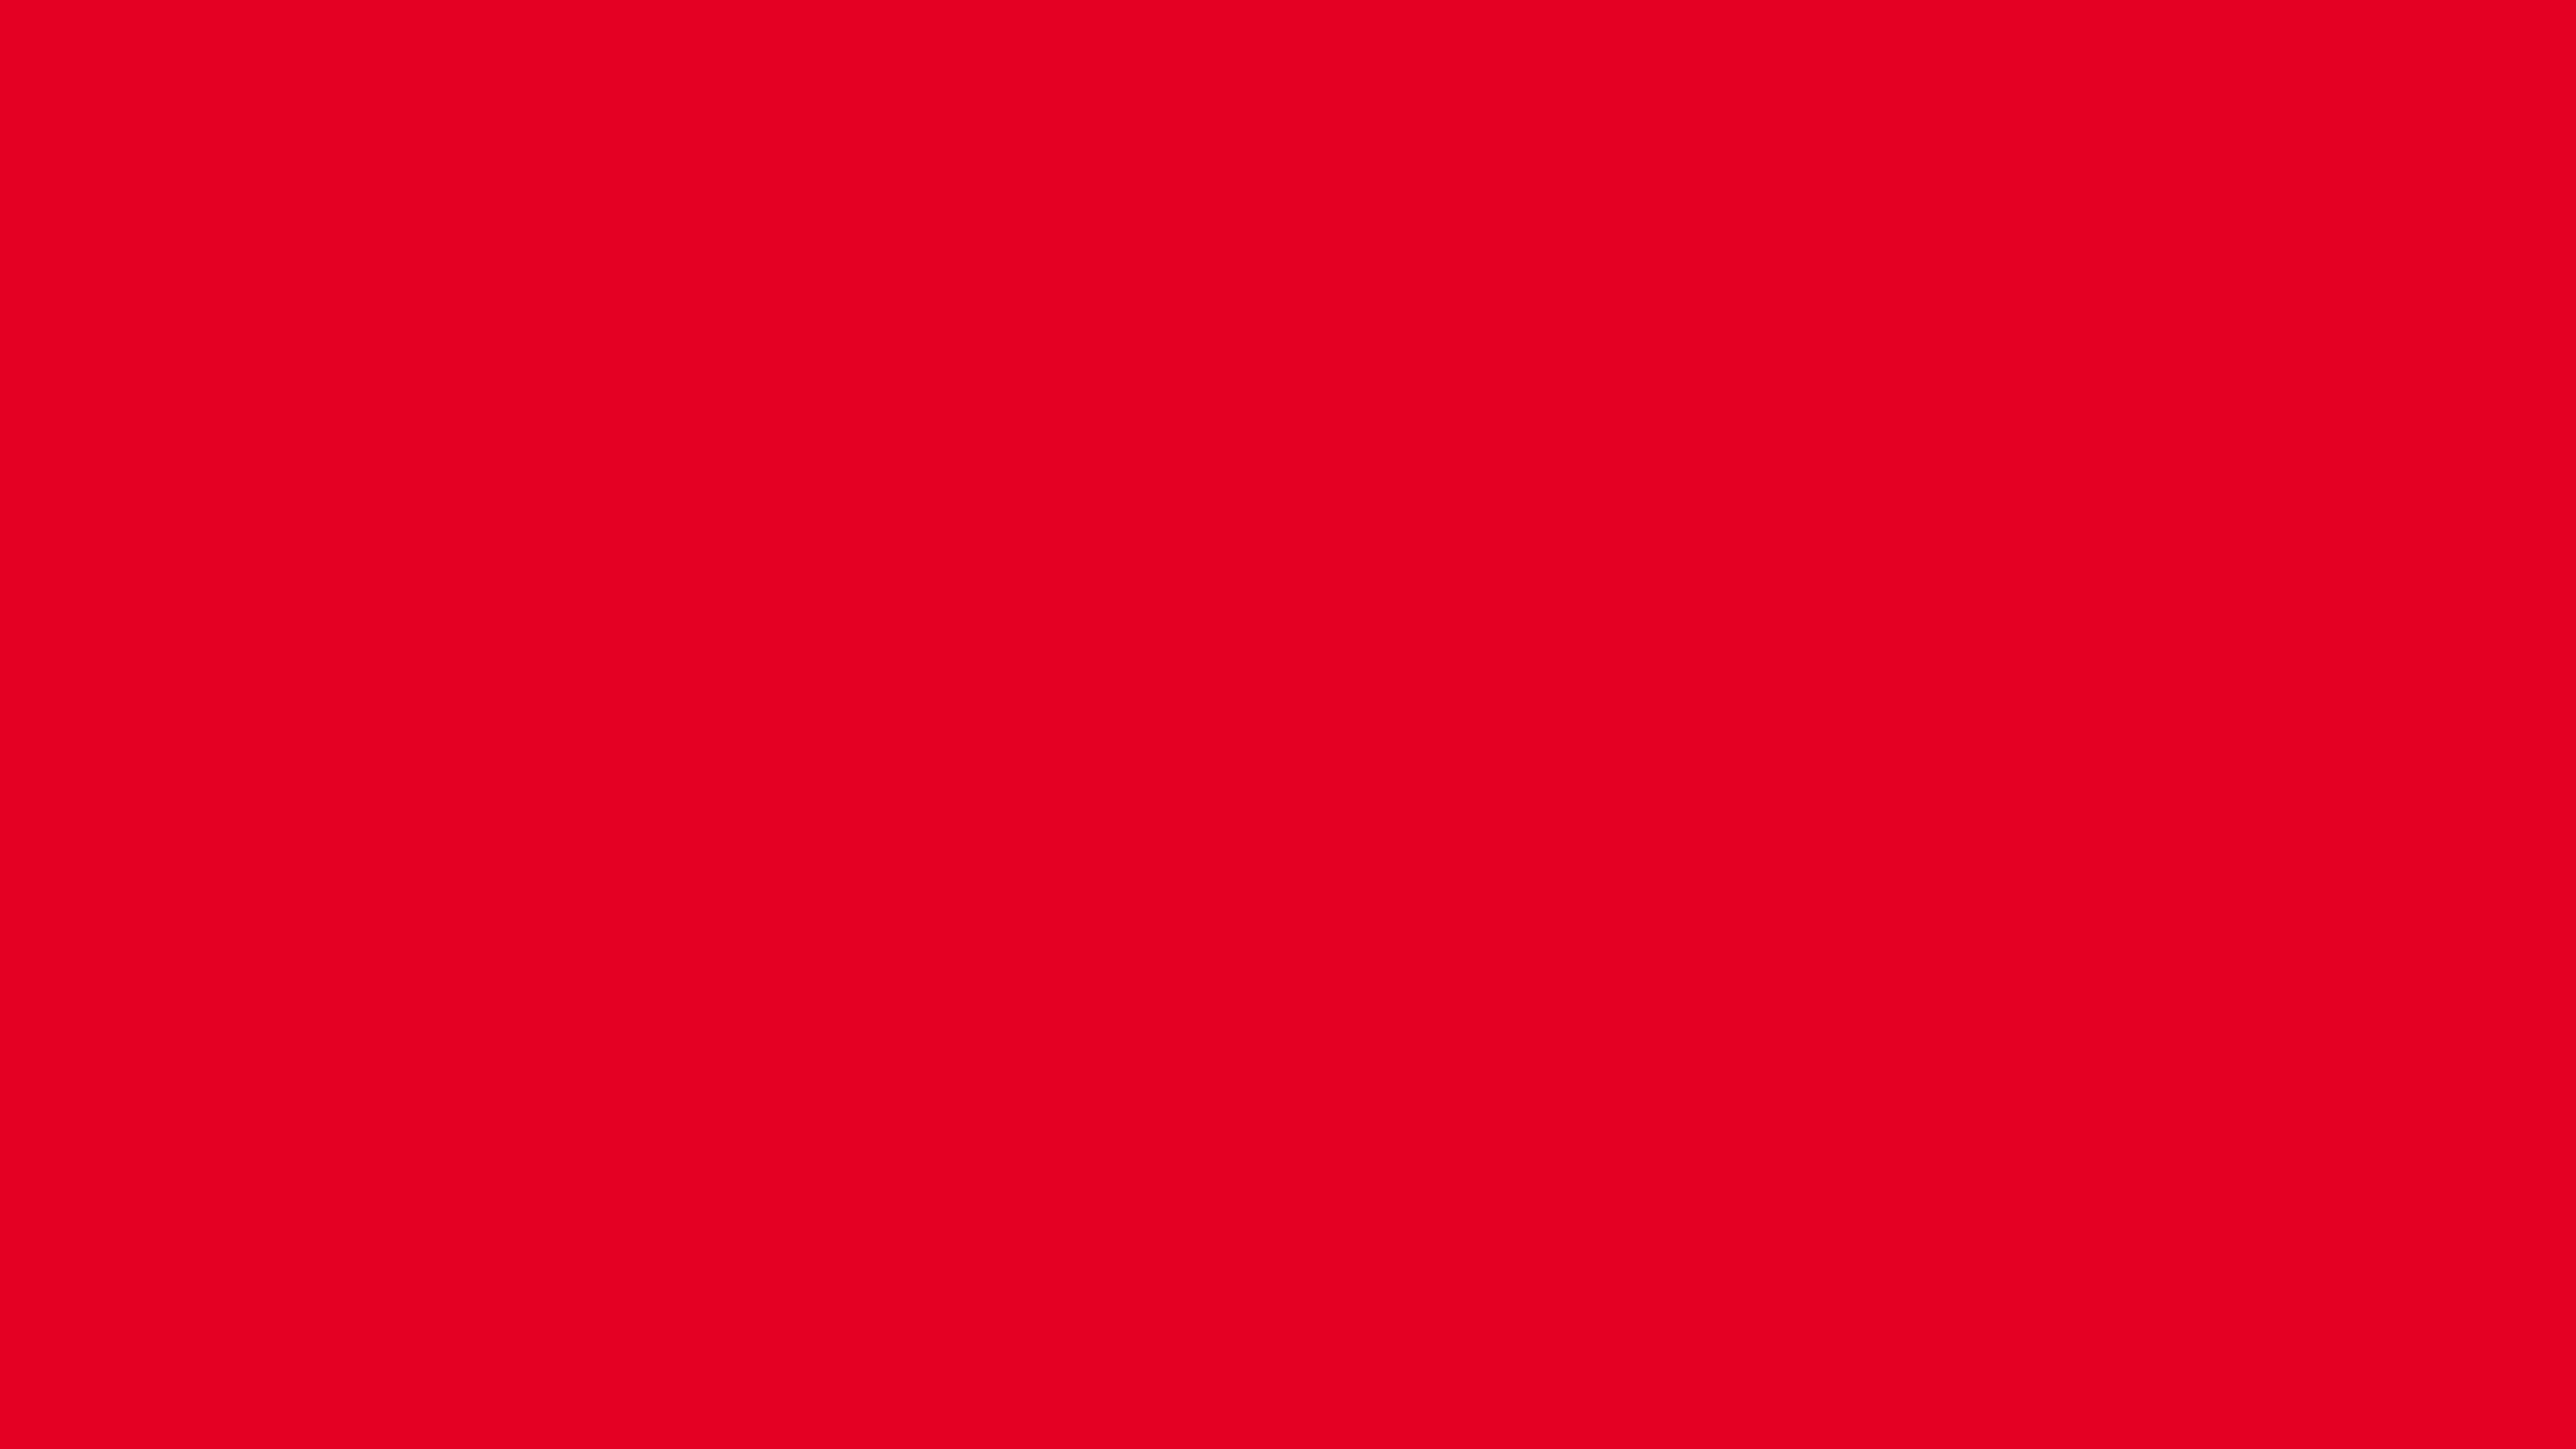 7680x4320 Cadmium Red Solid Color Background